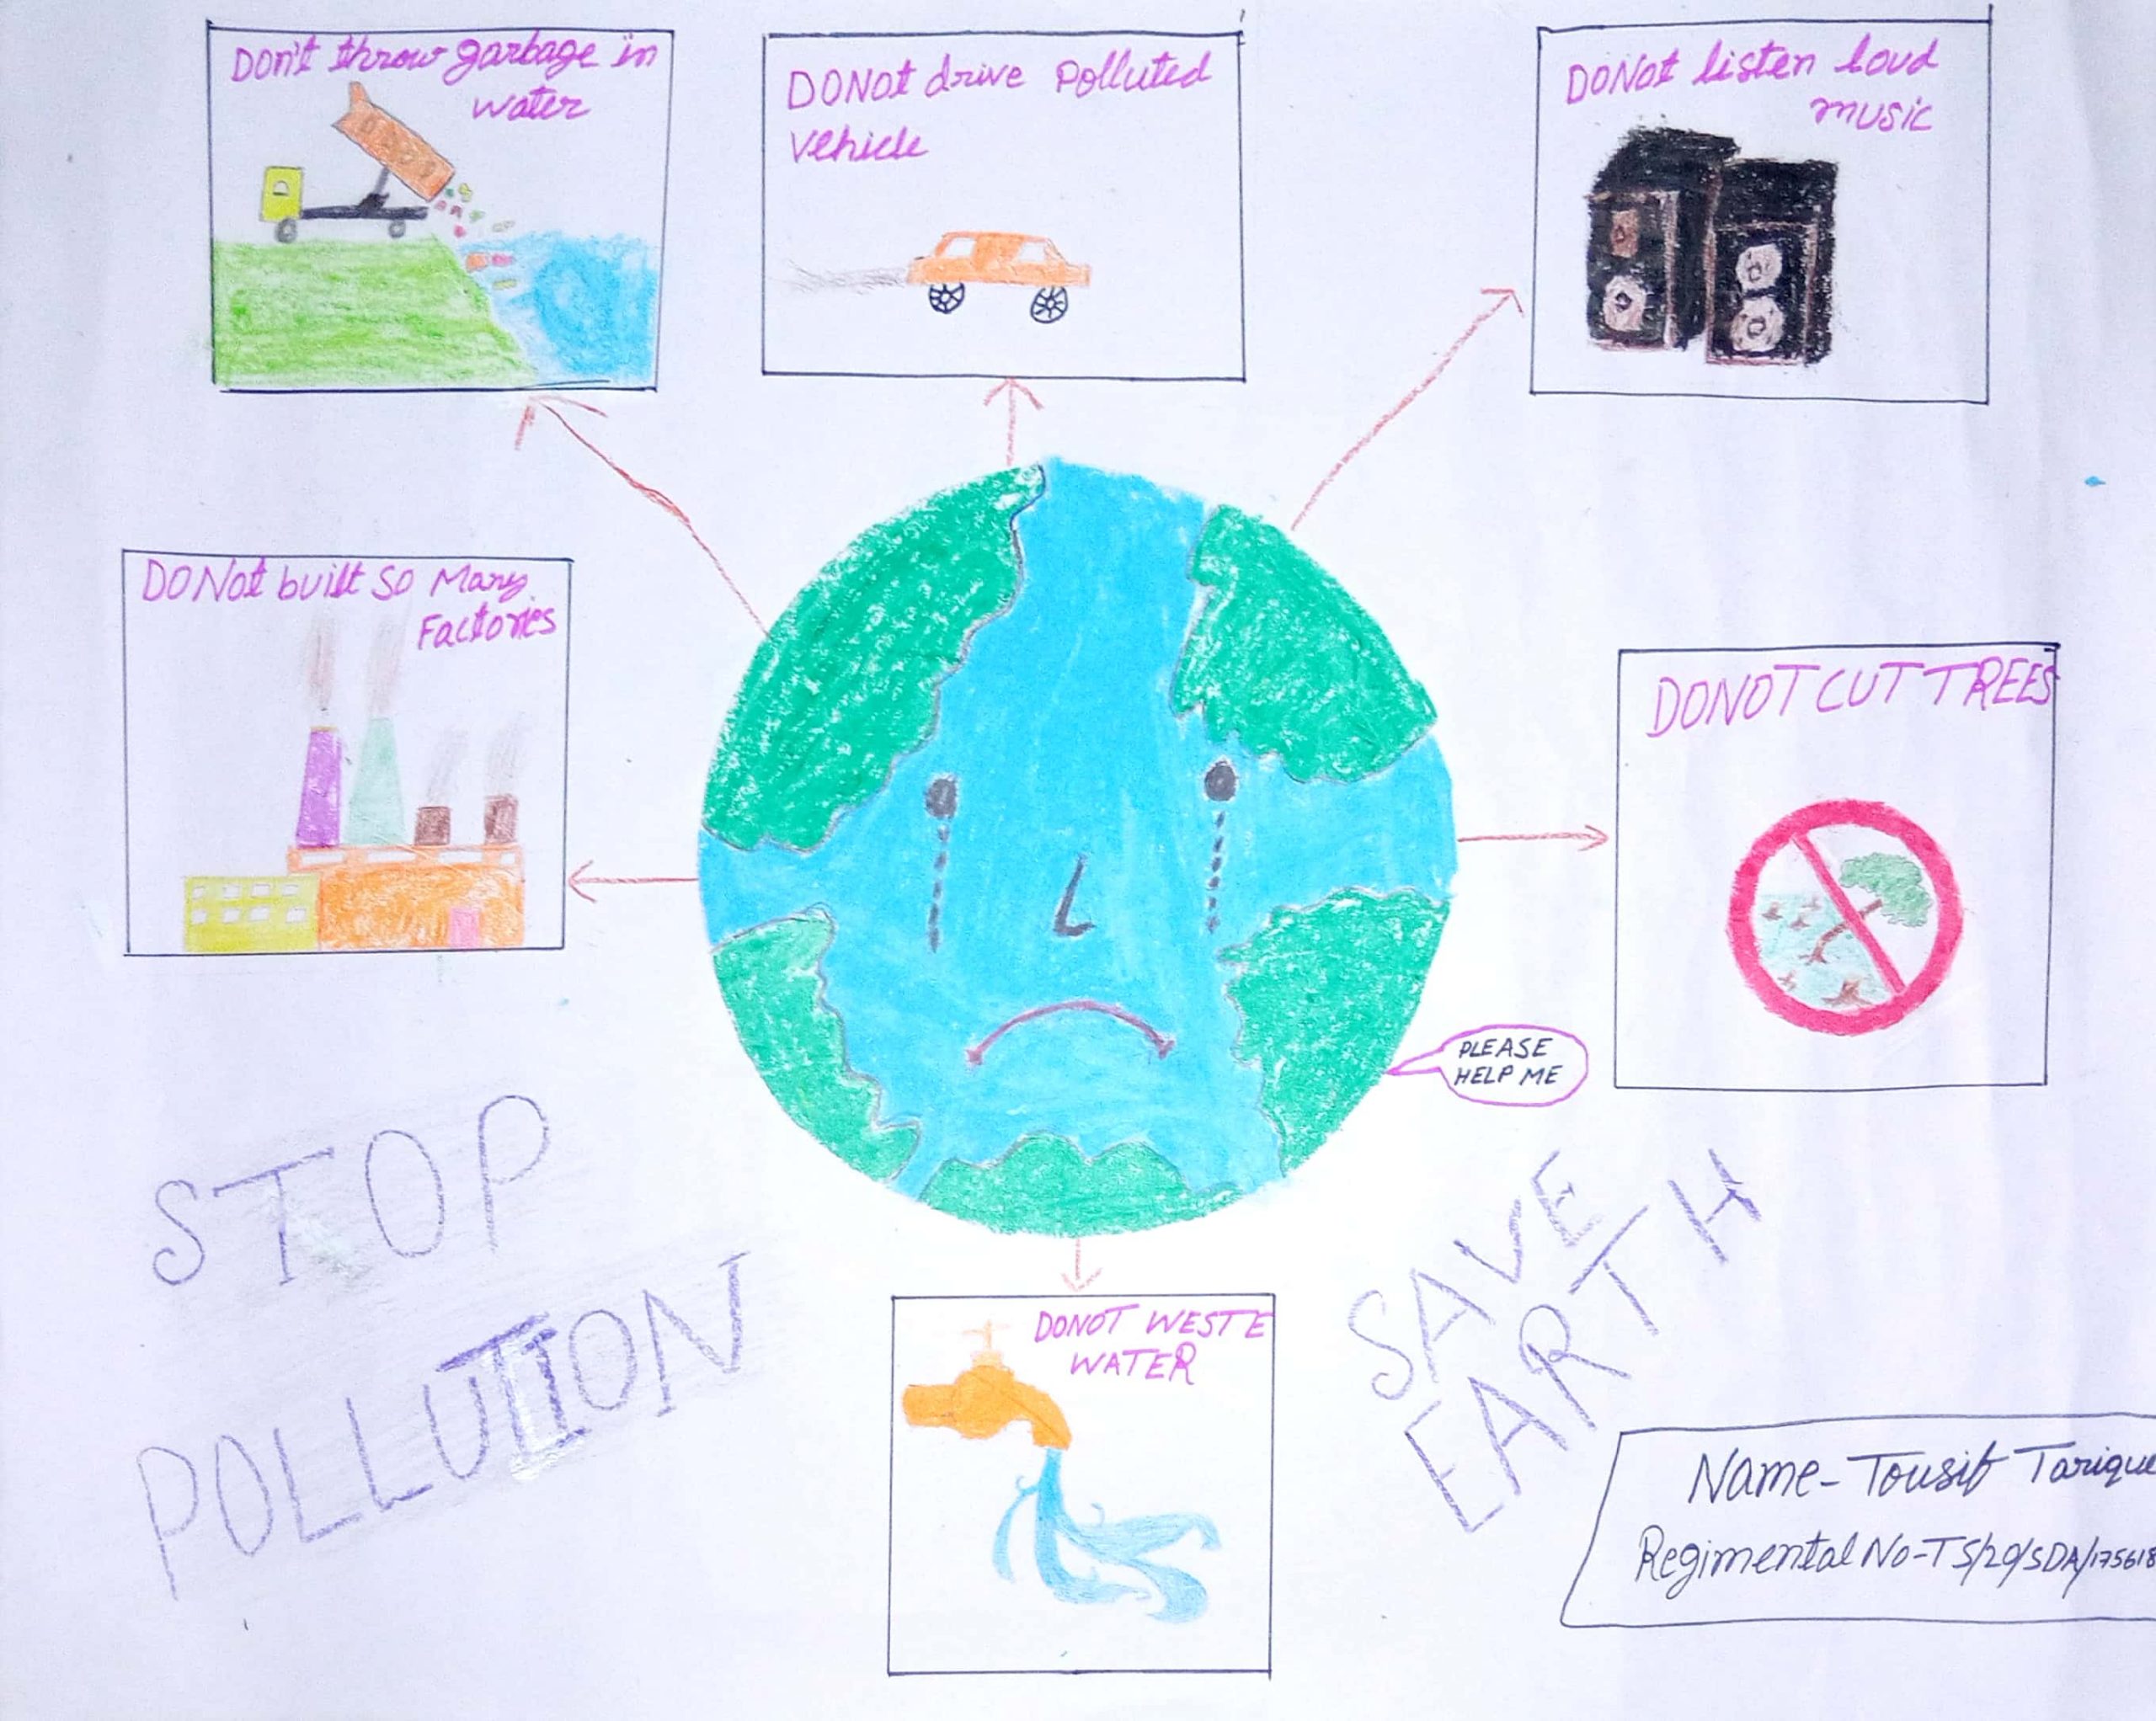 Stop pollution save Earth Painting by Suraj Shil